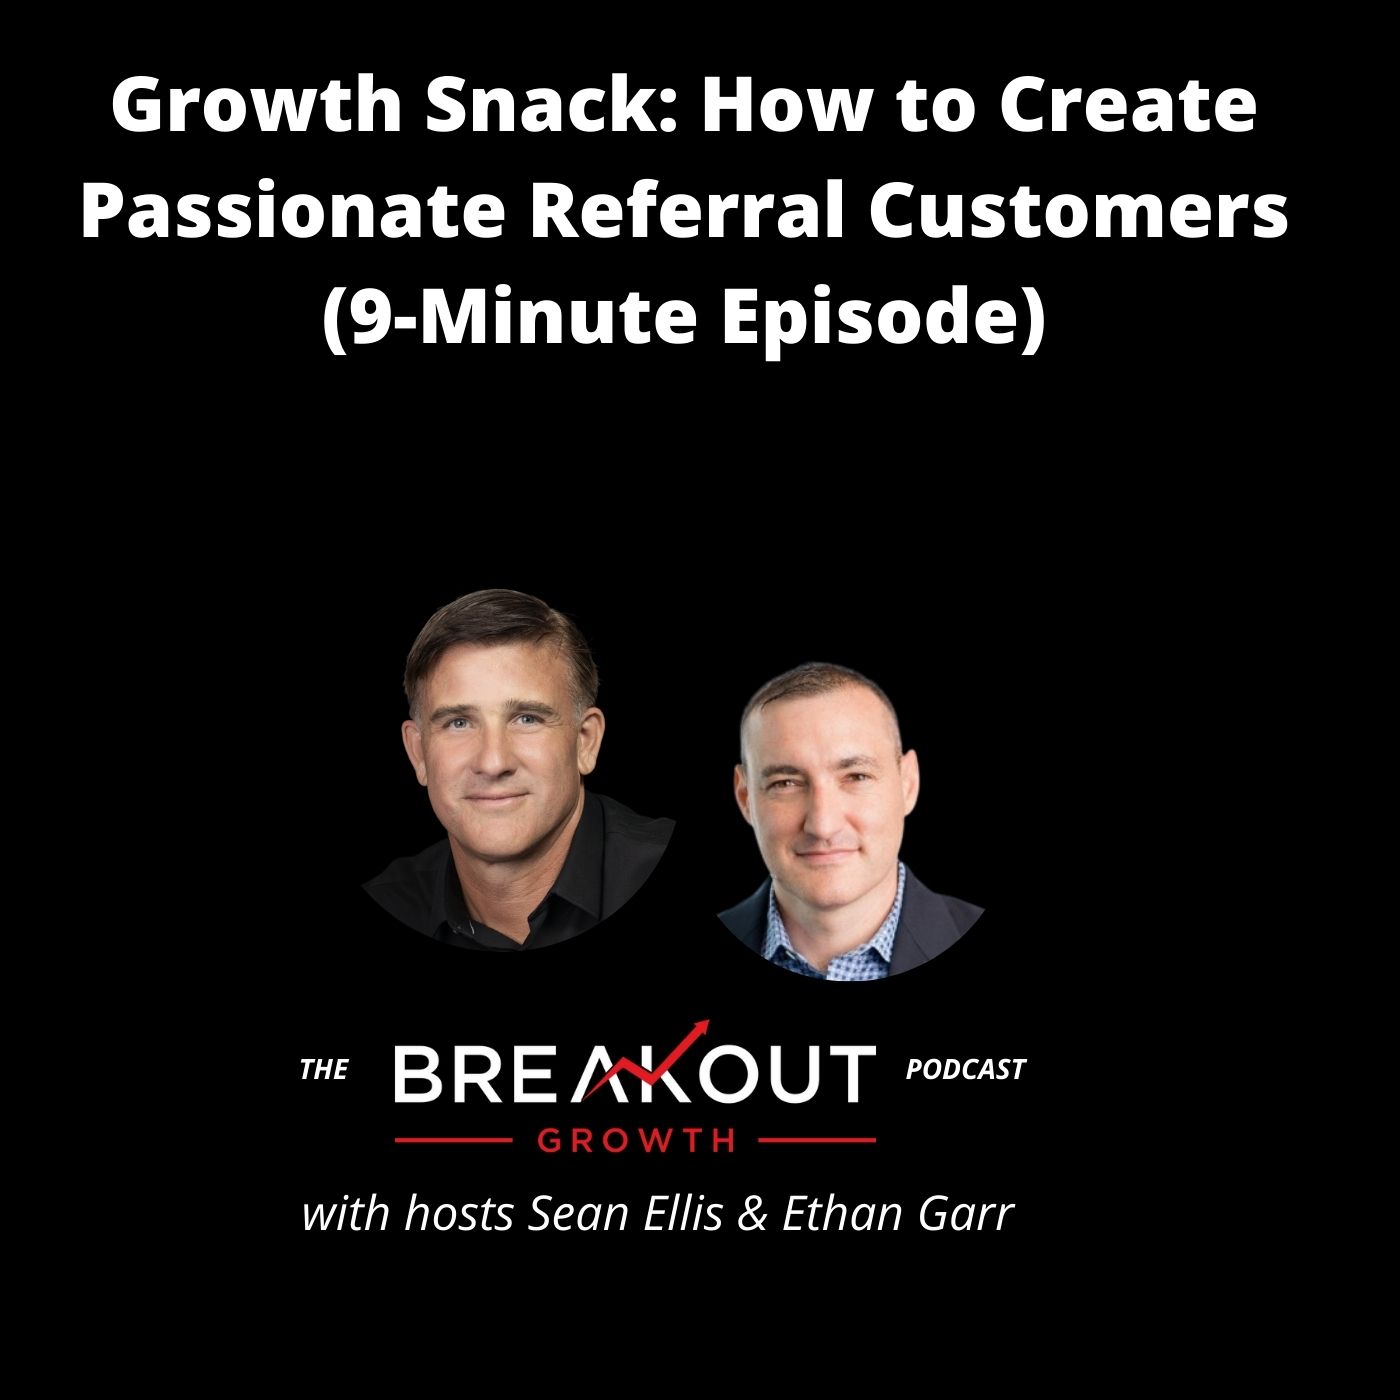 Growth Snack: How to Create Passionate Referral Customers